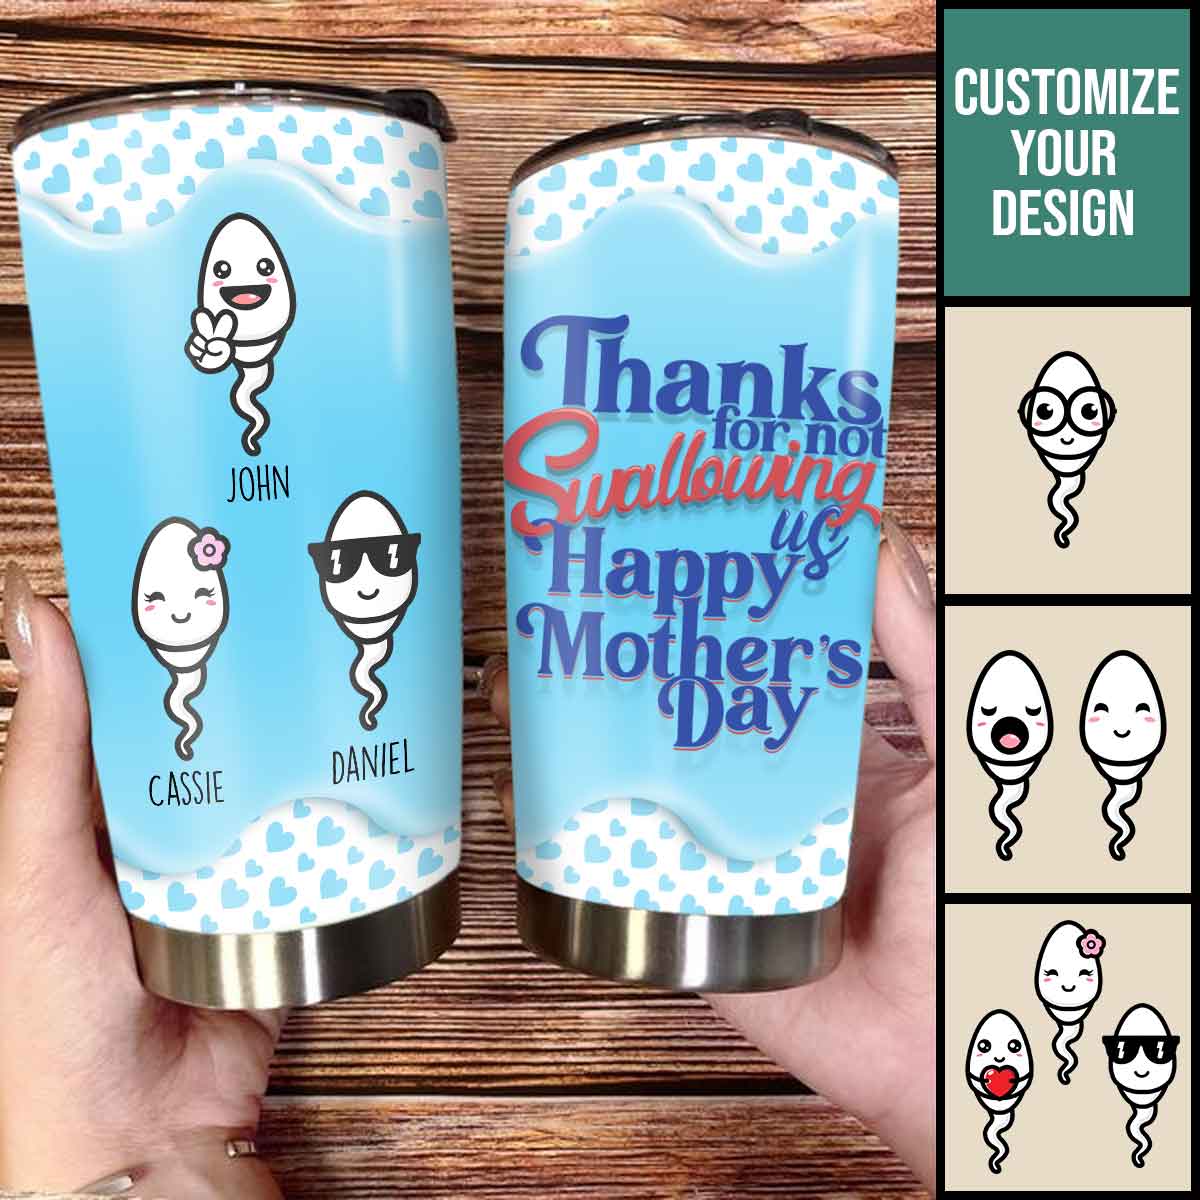 Thanks For Not Swallowing Us - Personalized Funny Tumbler For Mom Mother's  Day Gift